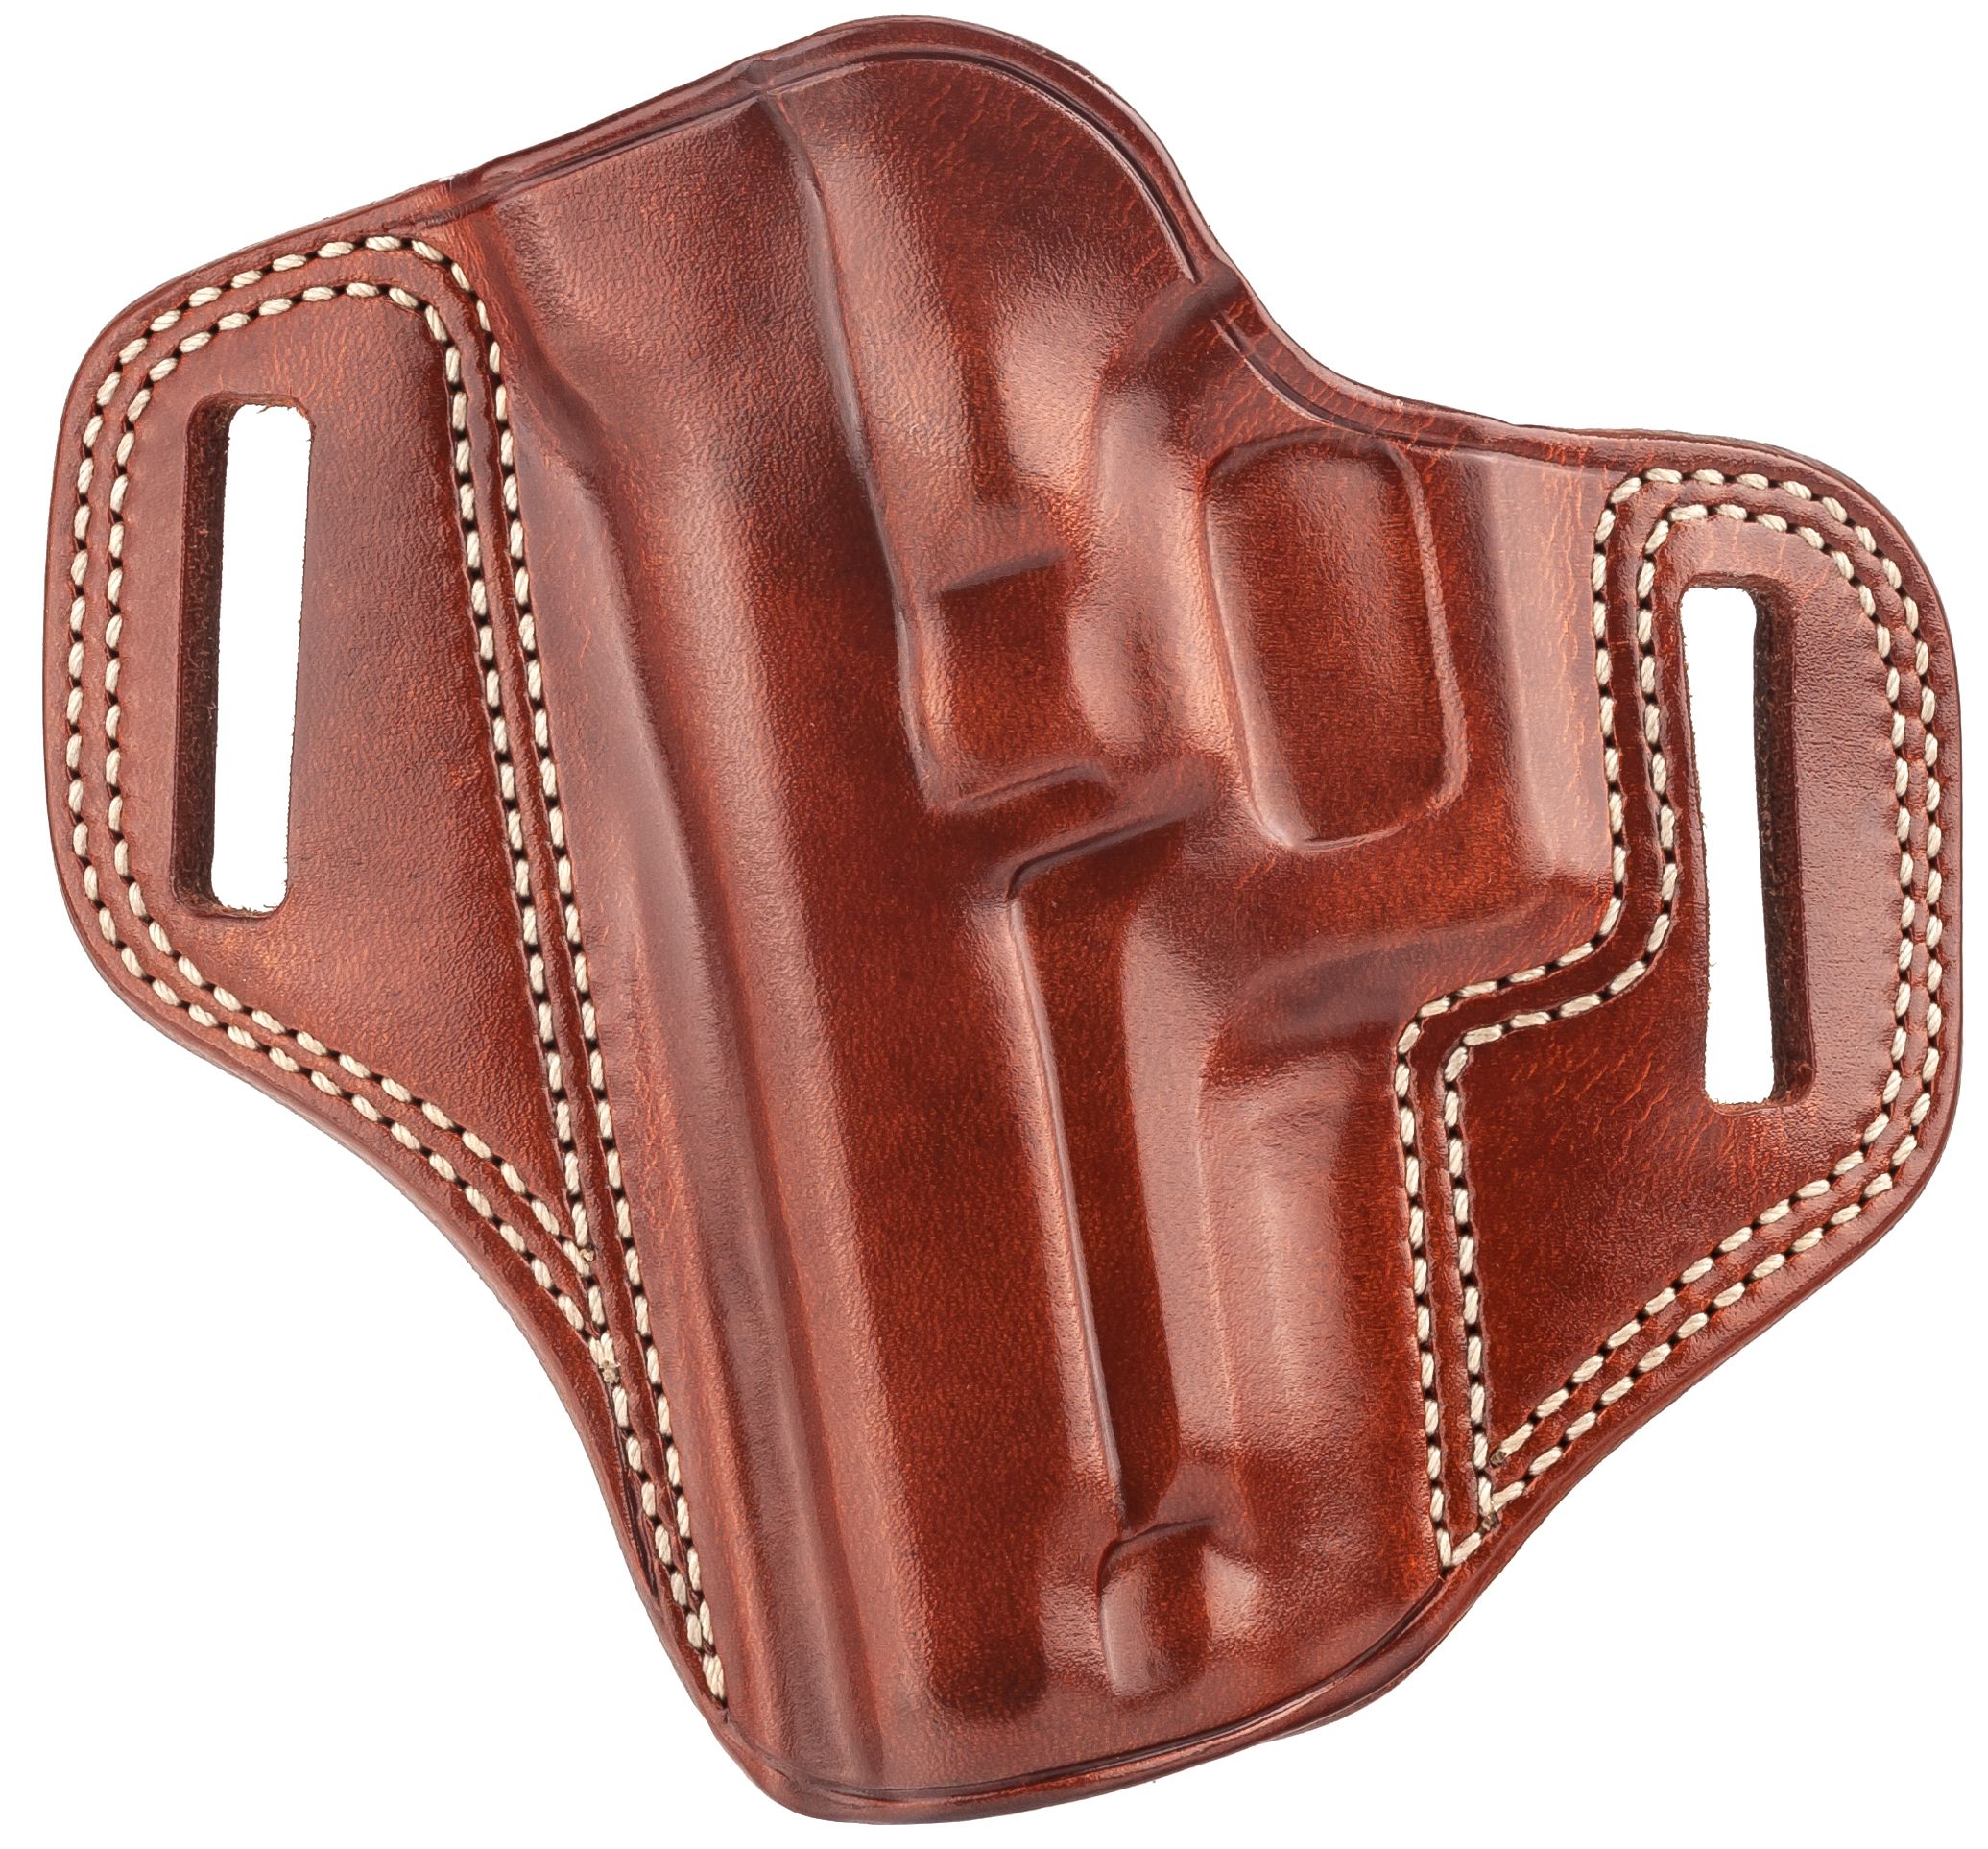 Galco Combat Master Concealment Holster - Left Hand Tan S&W 39/4006/59/: CM245